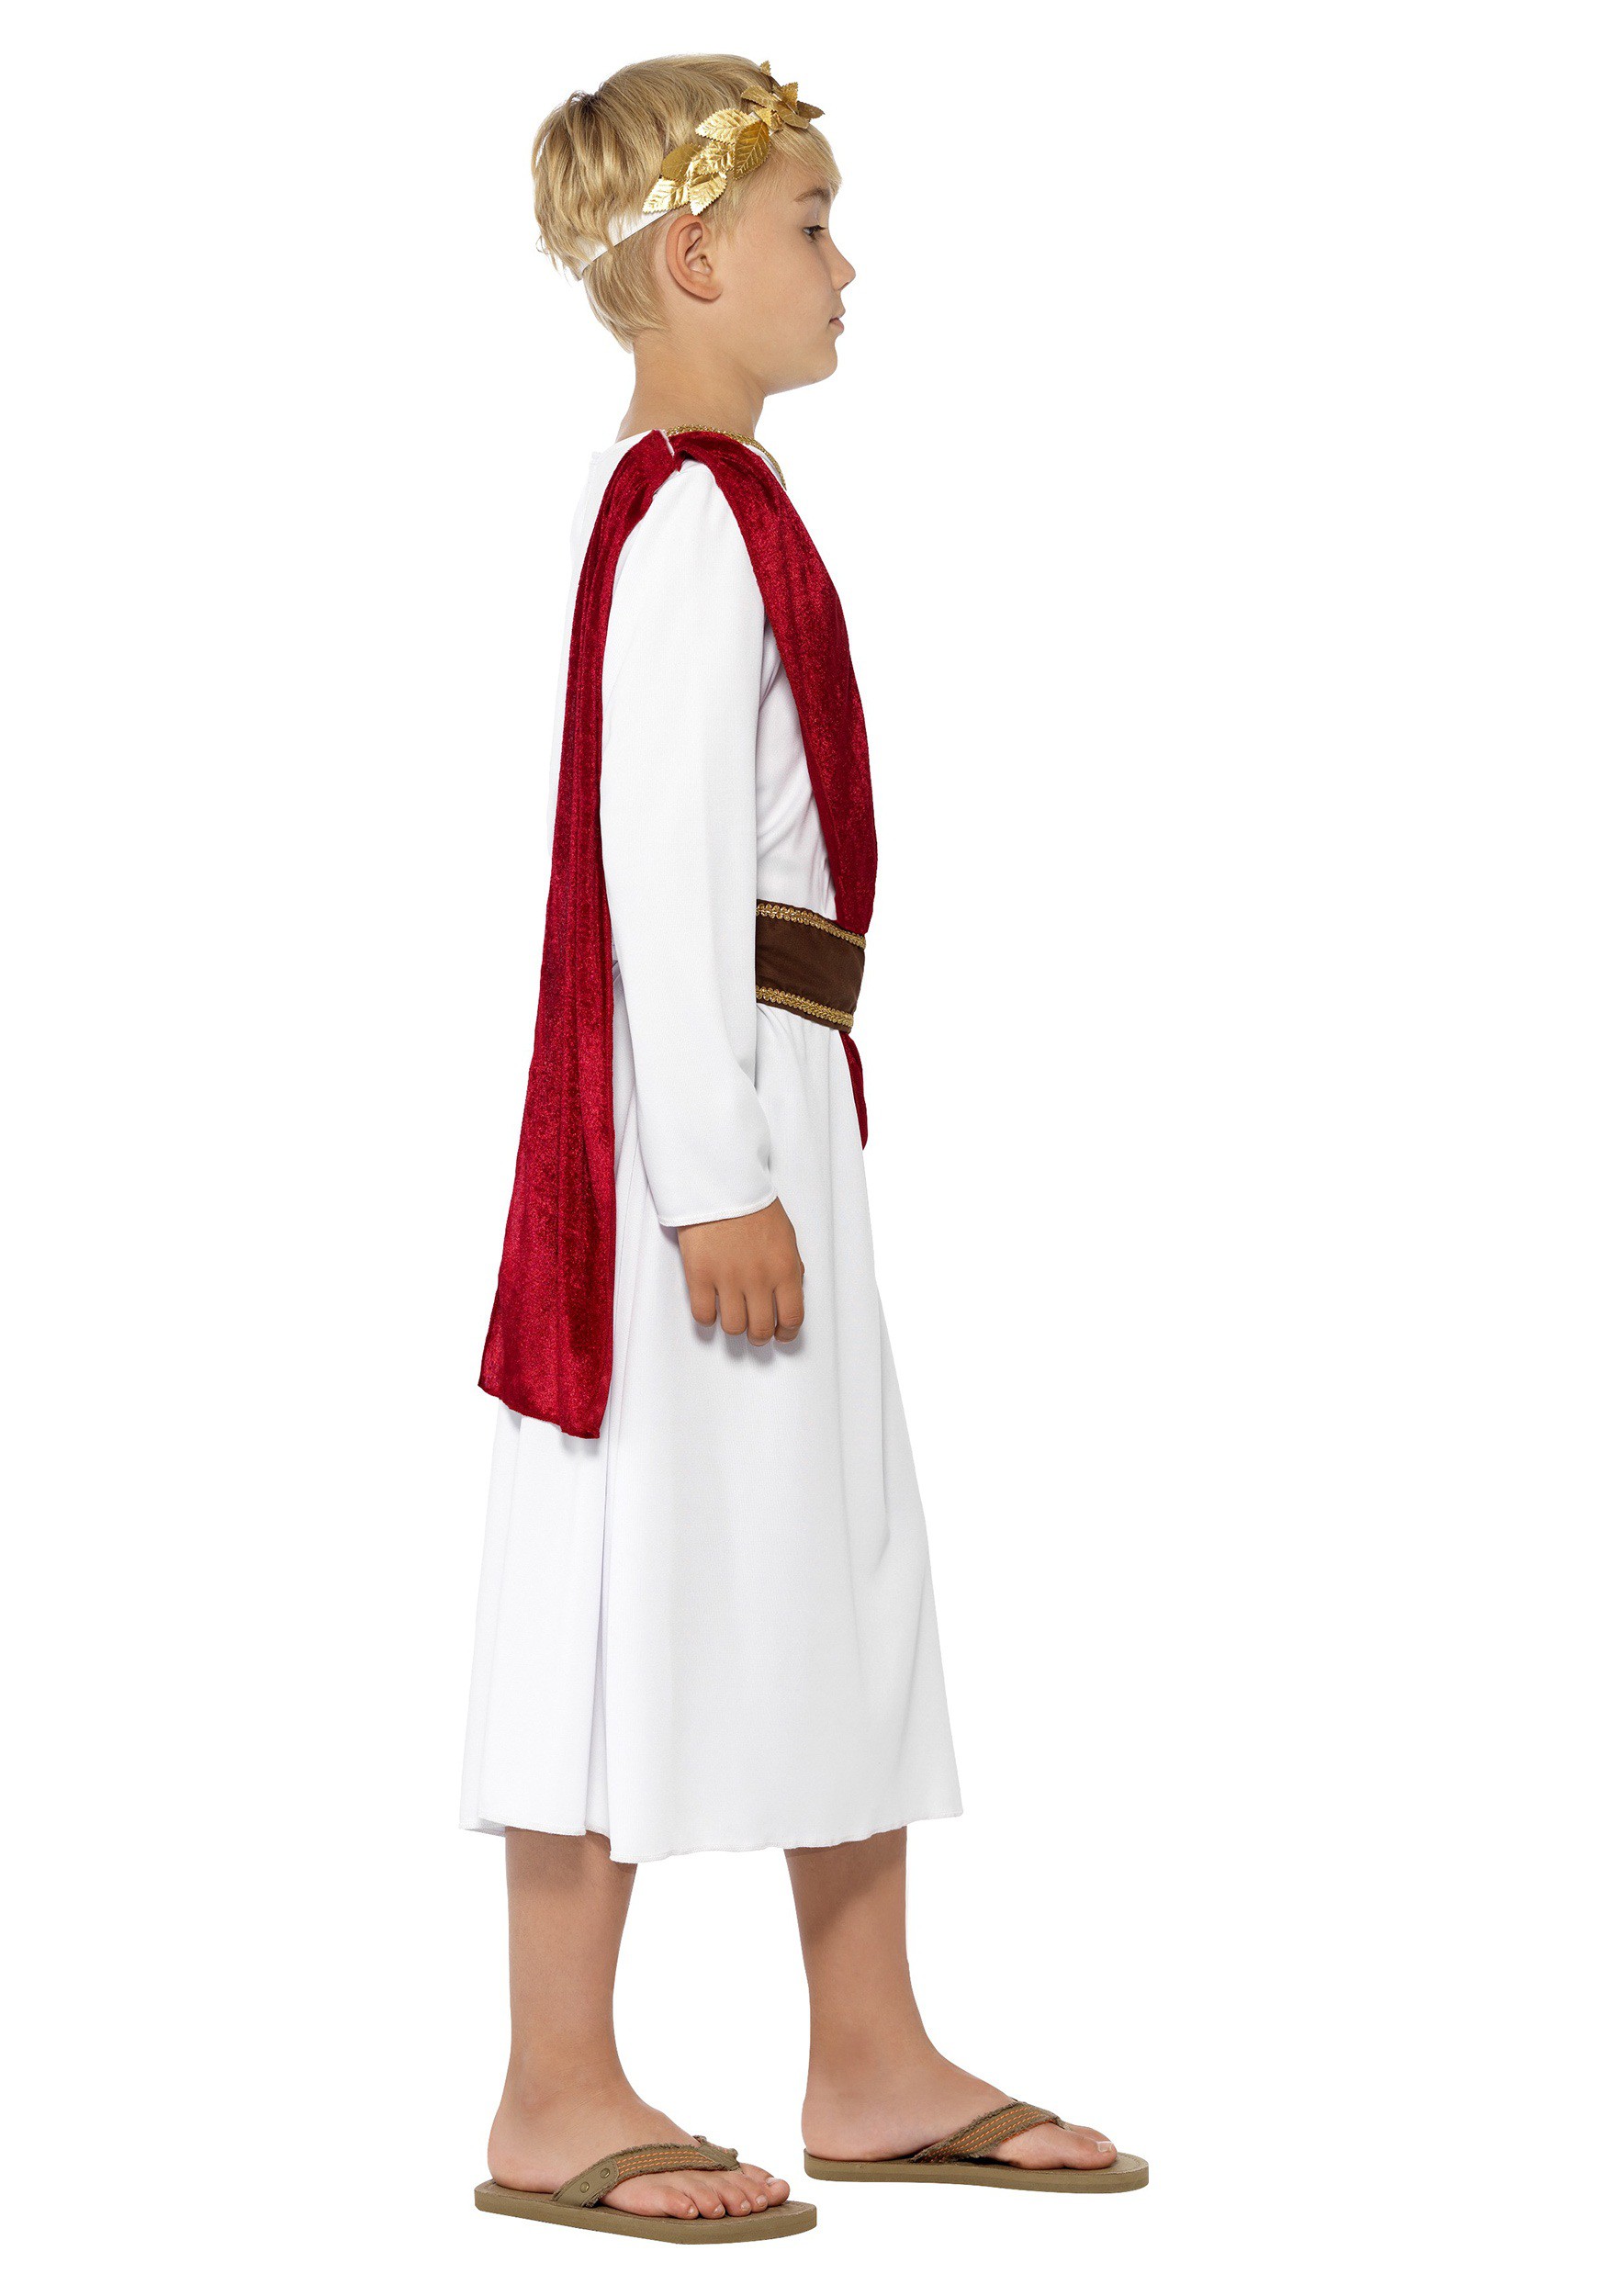 childrens roman outfit